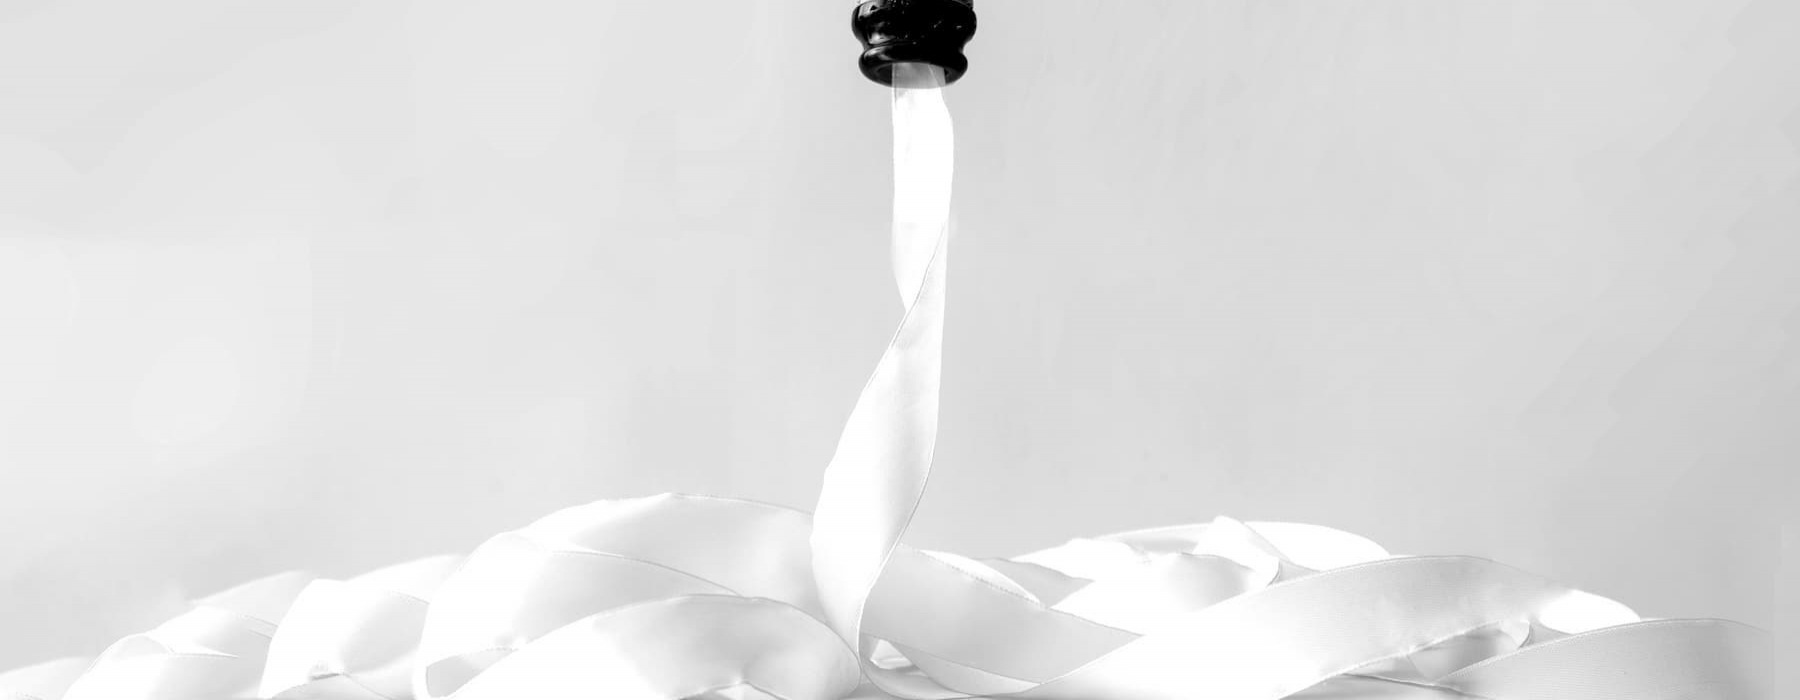 lifestyle image of a champagne bottle pouring something out